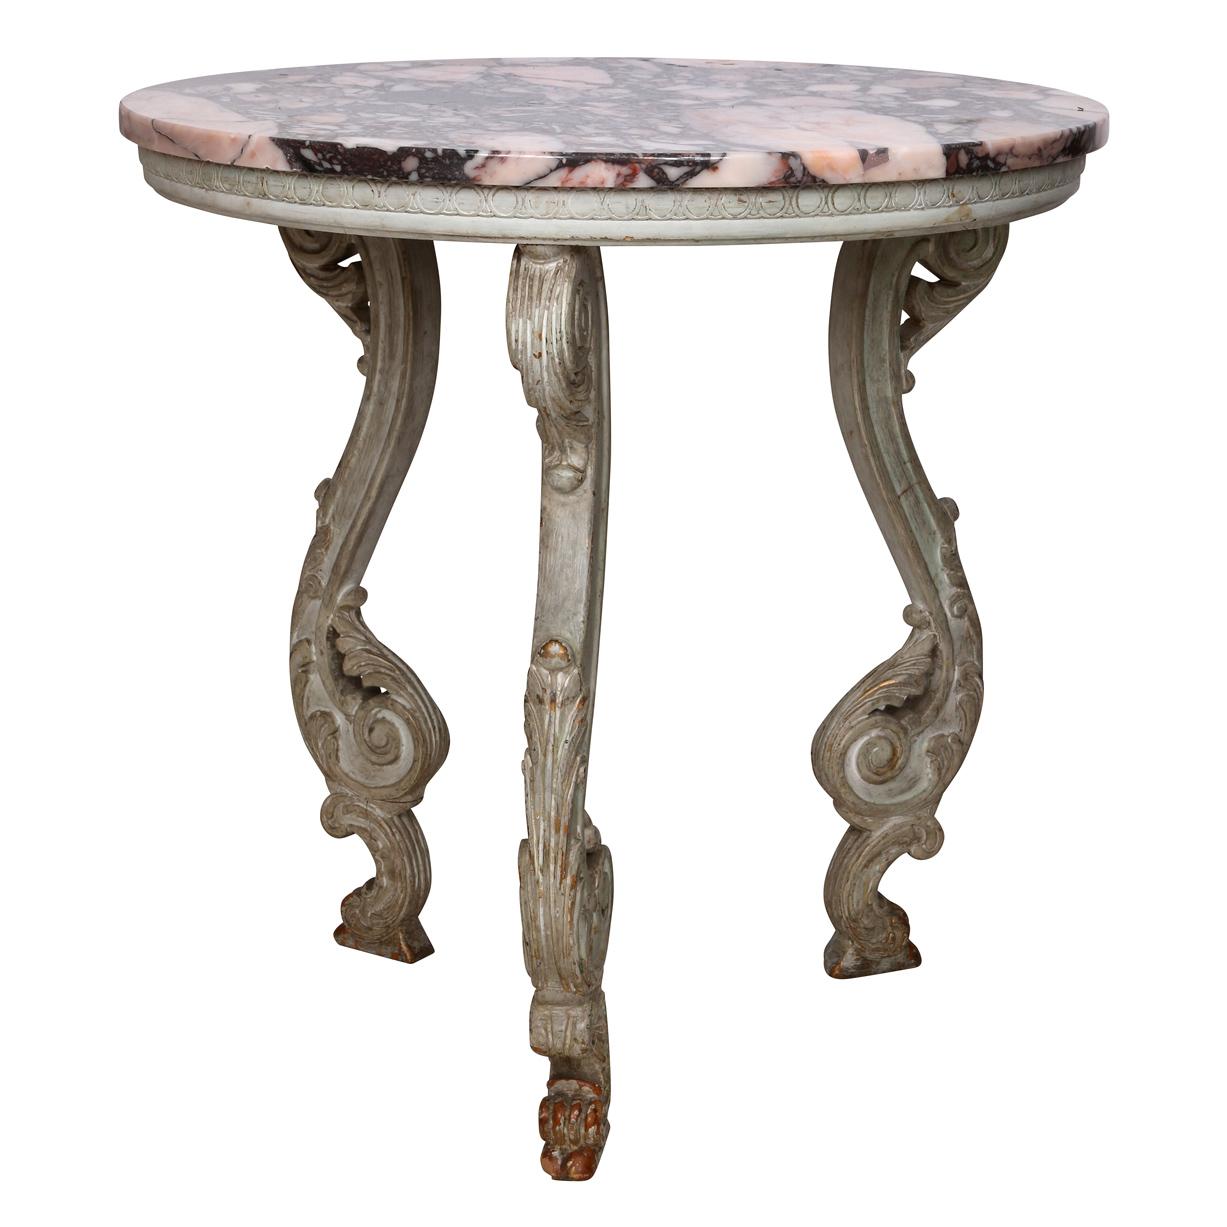 A gorgeous vintage side table with removable marble top with Serge Roche inspired carved detail.